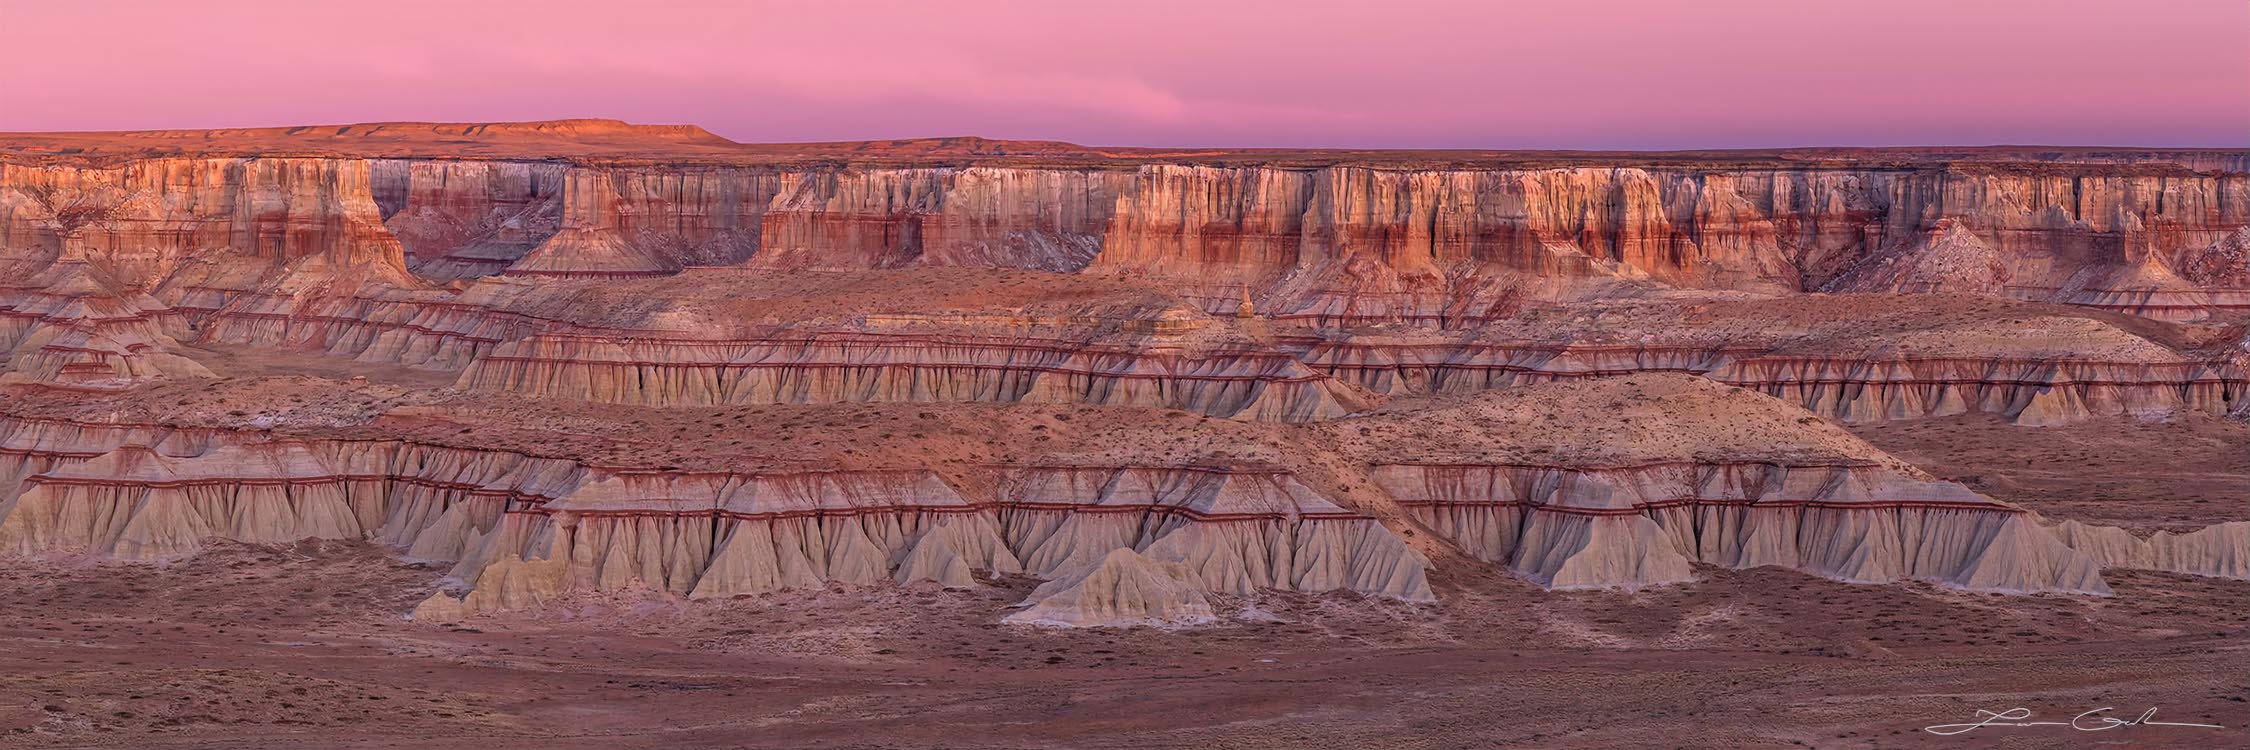 A colorful canyon with red stripes and brown sandstone with pink sunrise clouds above